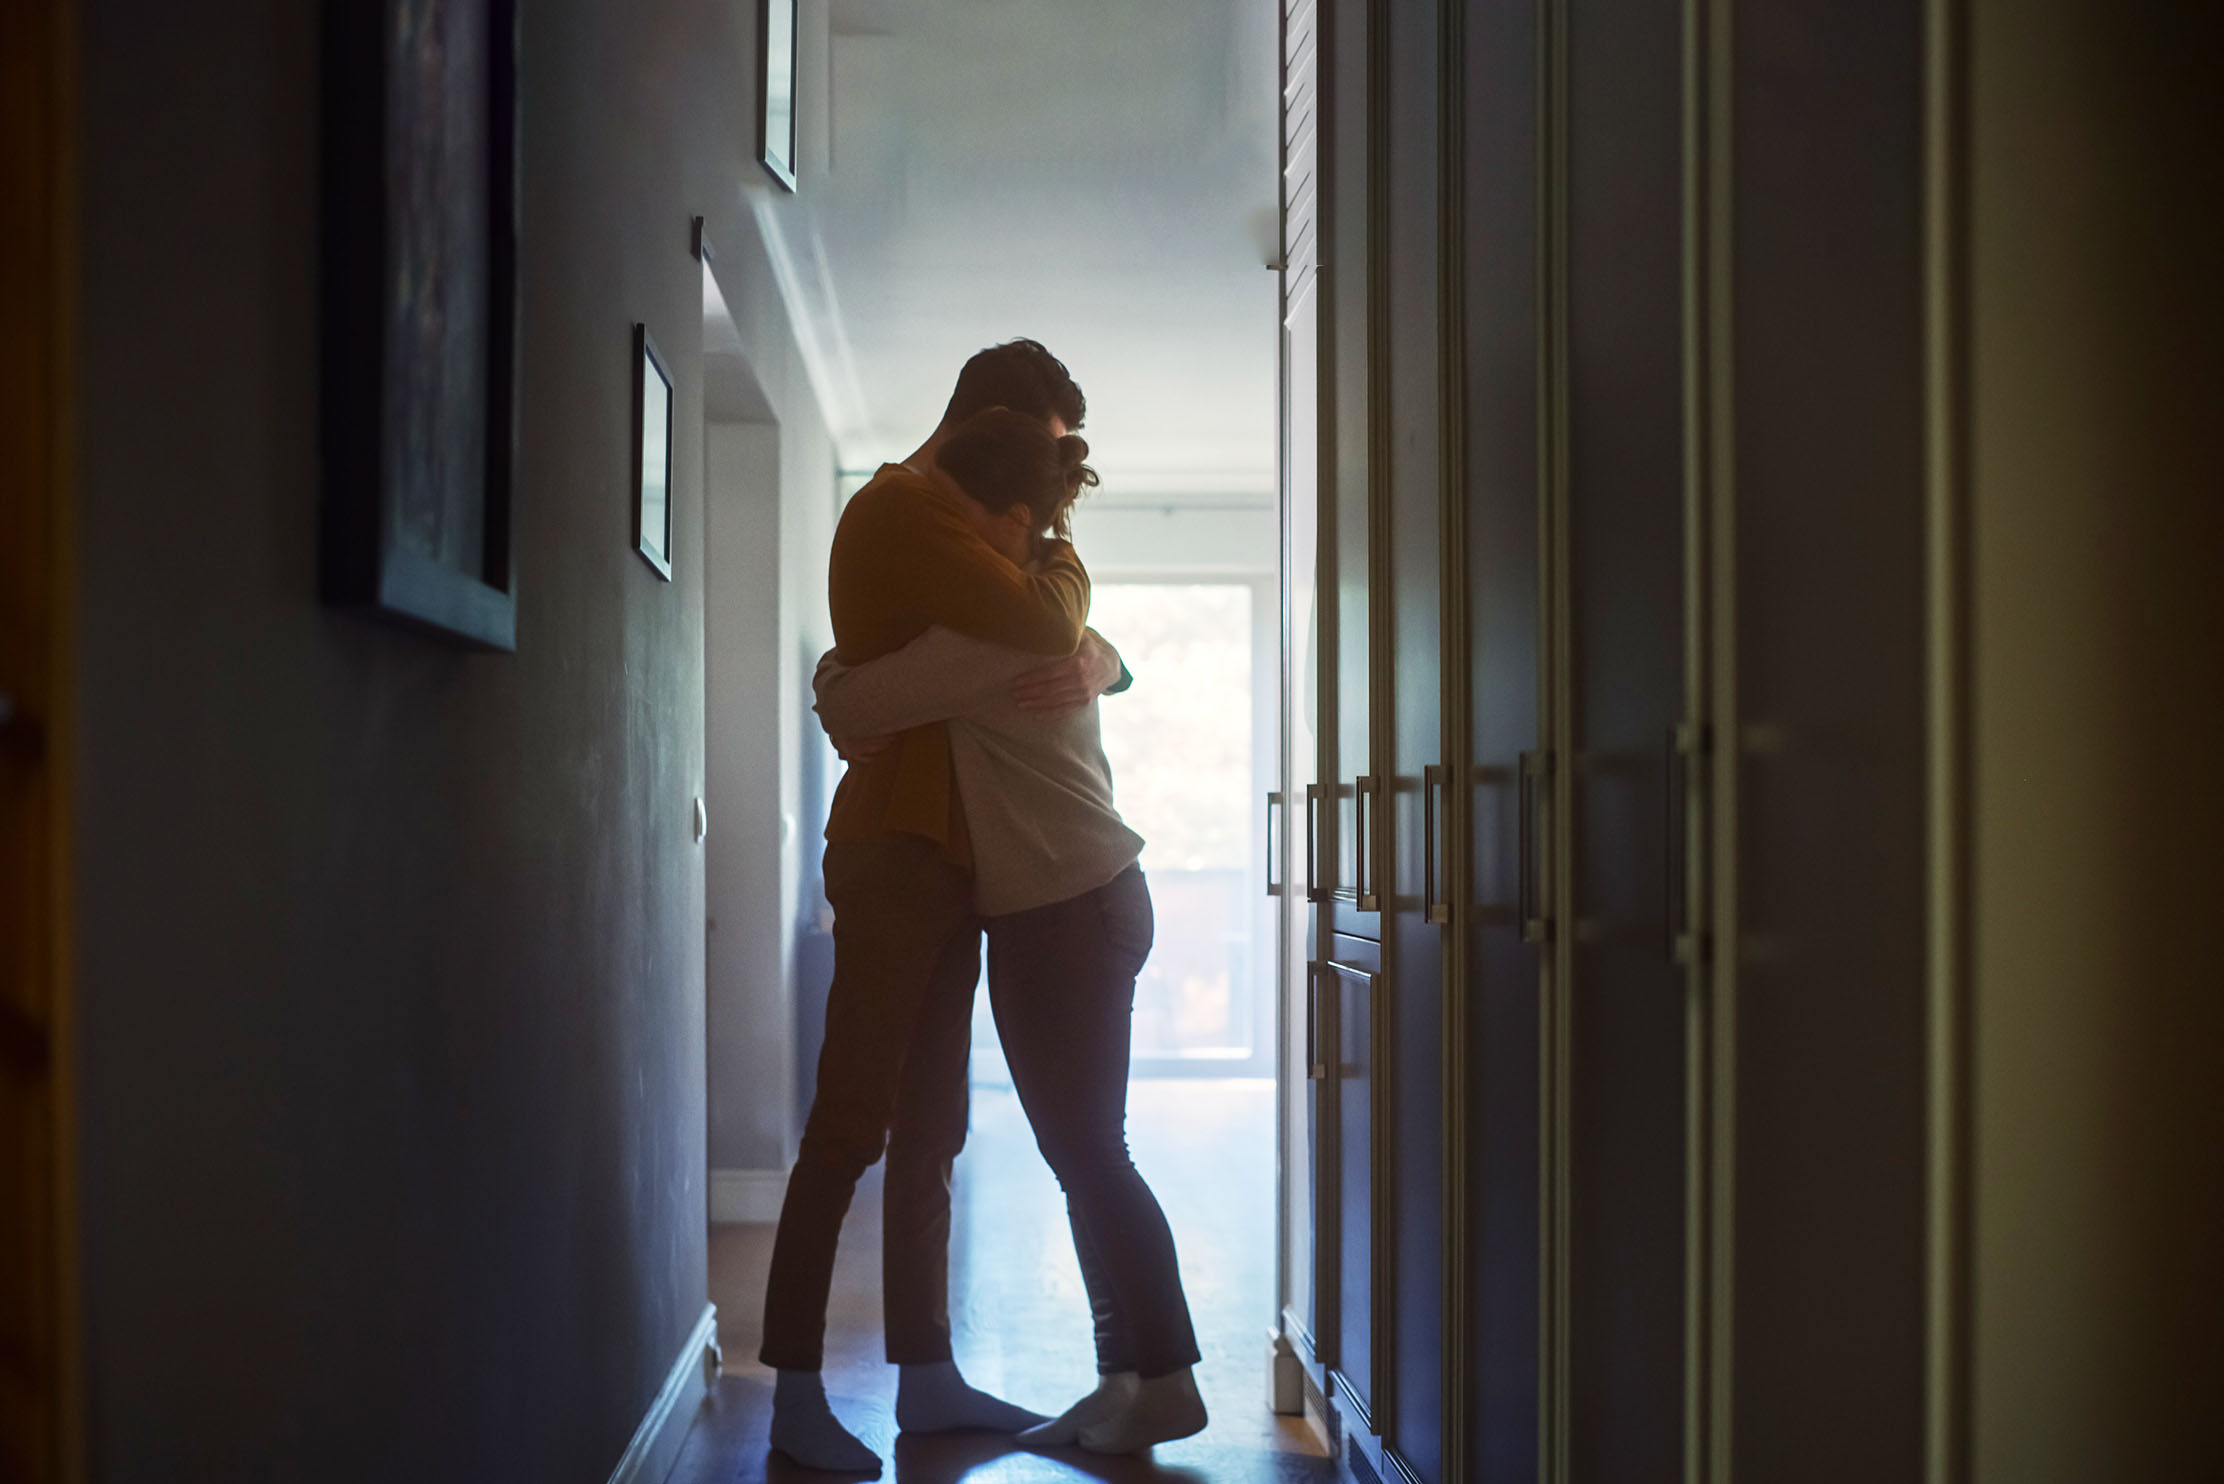 A couple hug each other in the hallway of a house